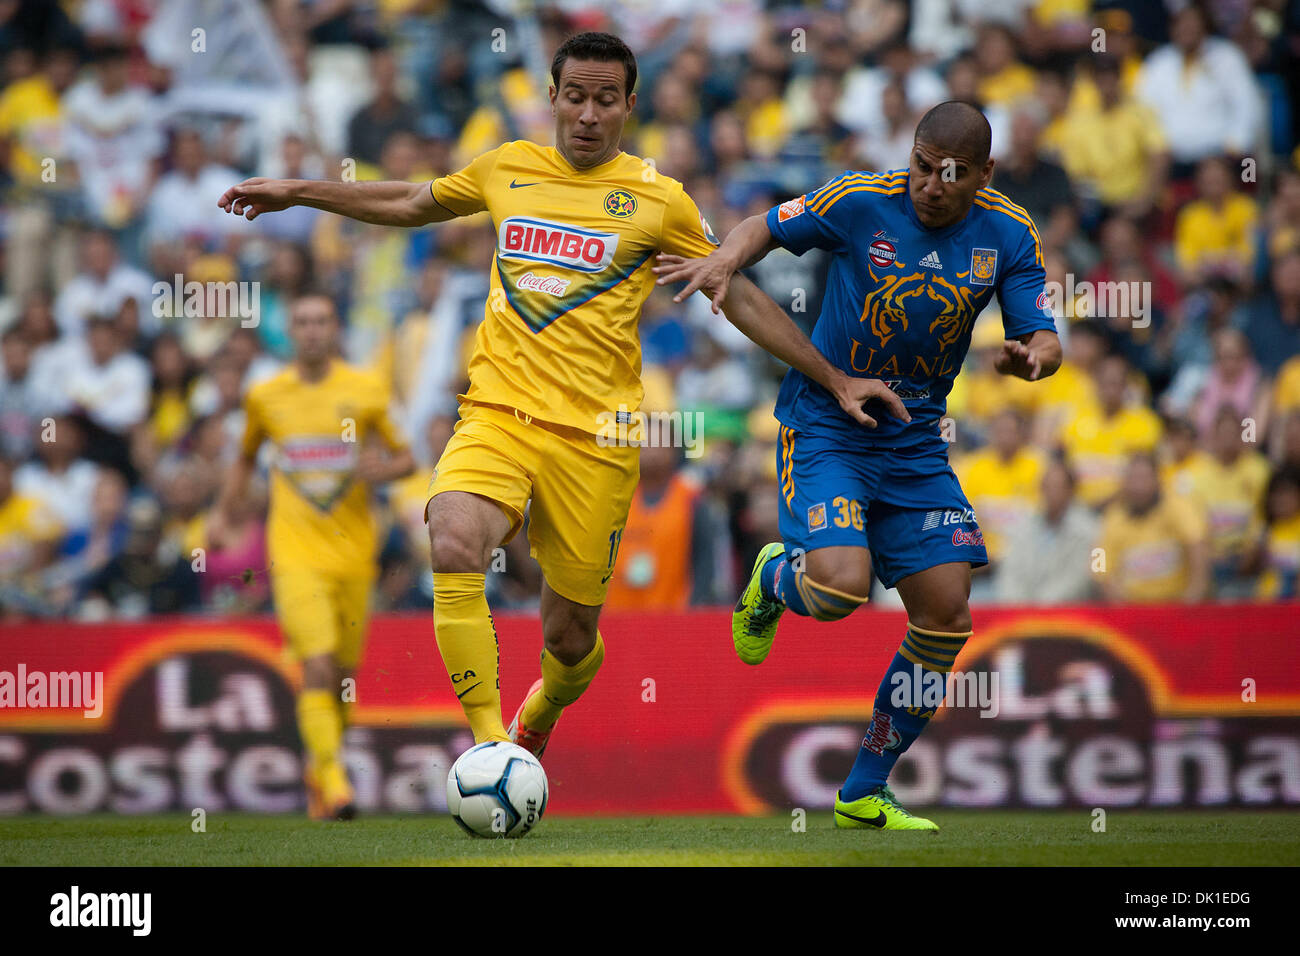 Mexico City, Mexico. 1st December 2013. America's Luis Gabriel Rey (L) vies for the ball with Carlos Salcido (R) of Tigres during a match of the Liga MX, held in the Azteca Stadium in Mexico City, capital of Mexico, on Dec. 1, 2013. (Xinhua/Pedro Mera/Alamy Live News) Stock Photo